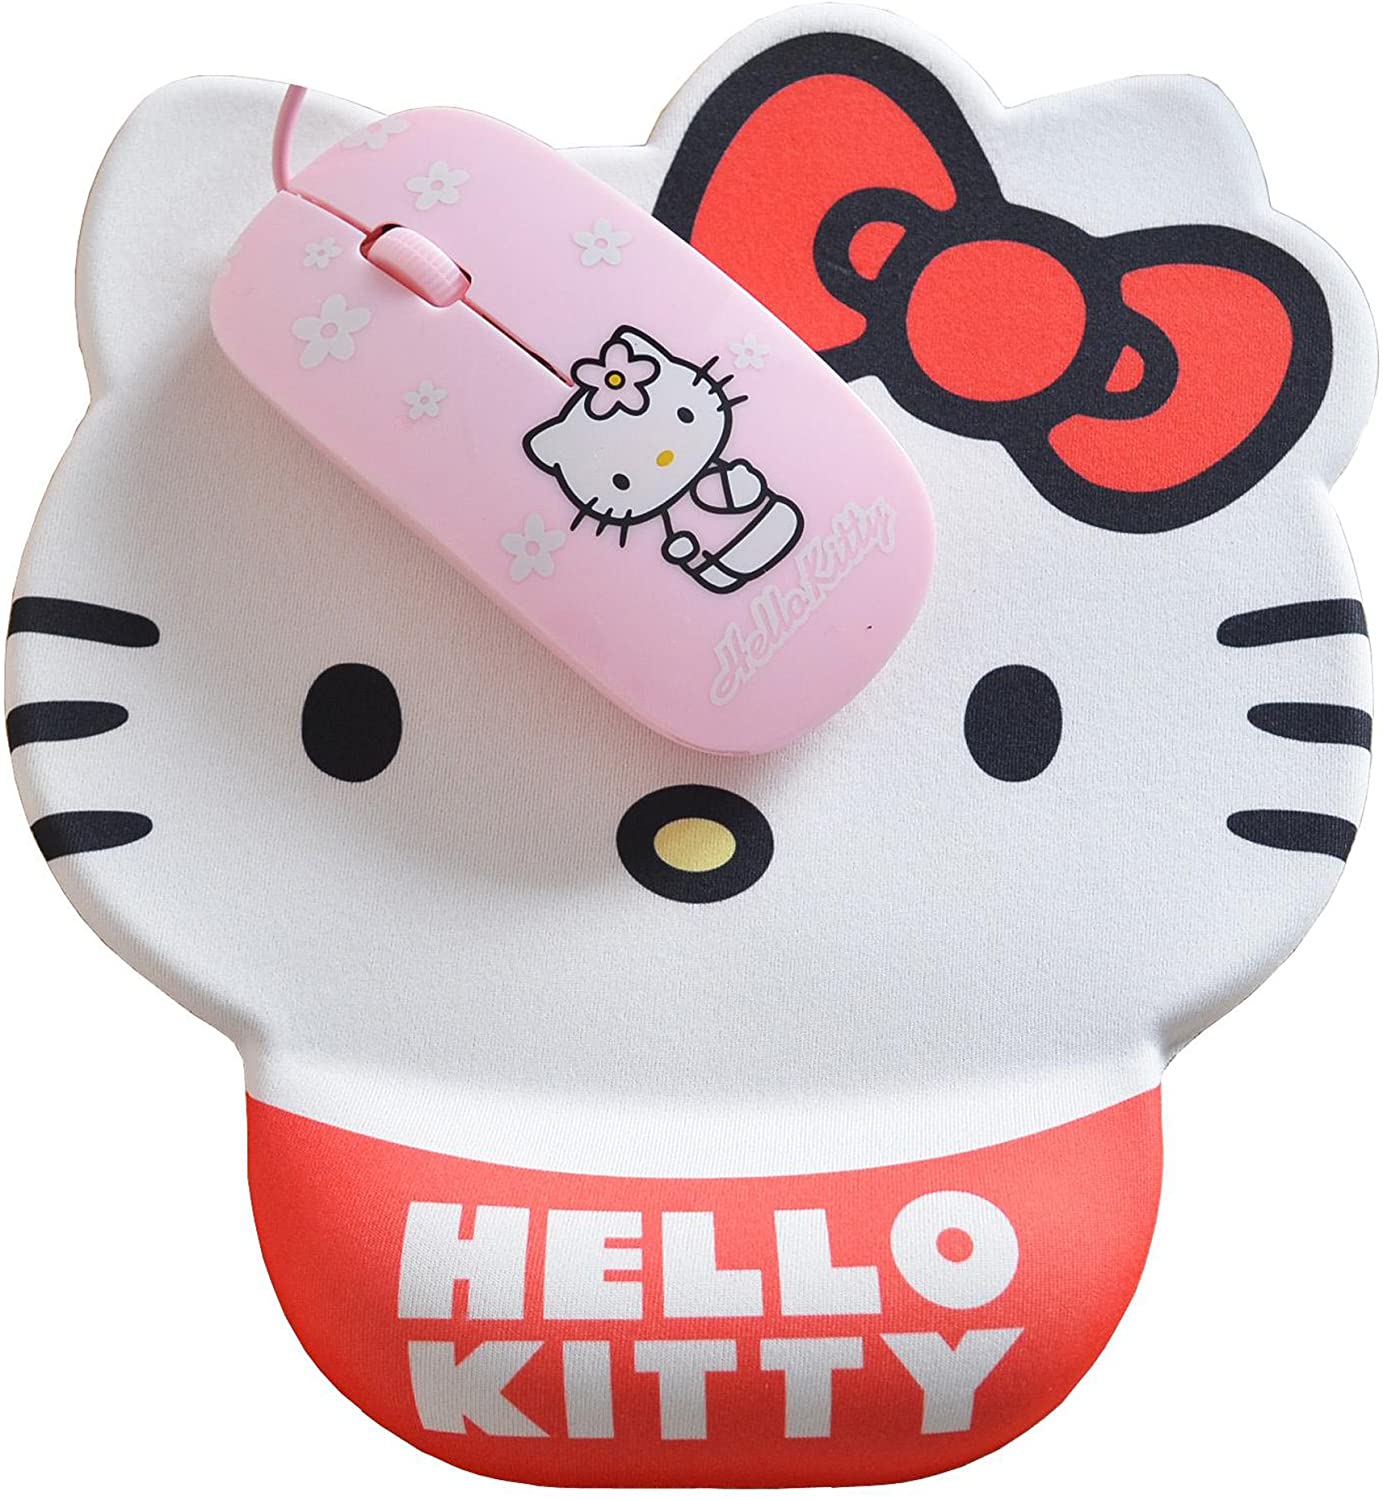 Hello Kitty Mouse Pad with Wrist Support - Cute Gaming Decor